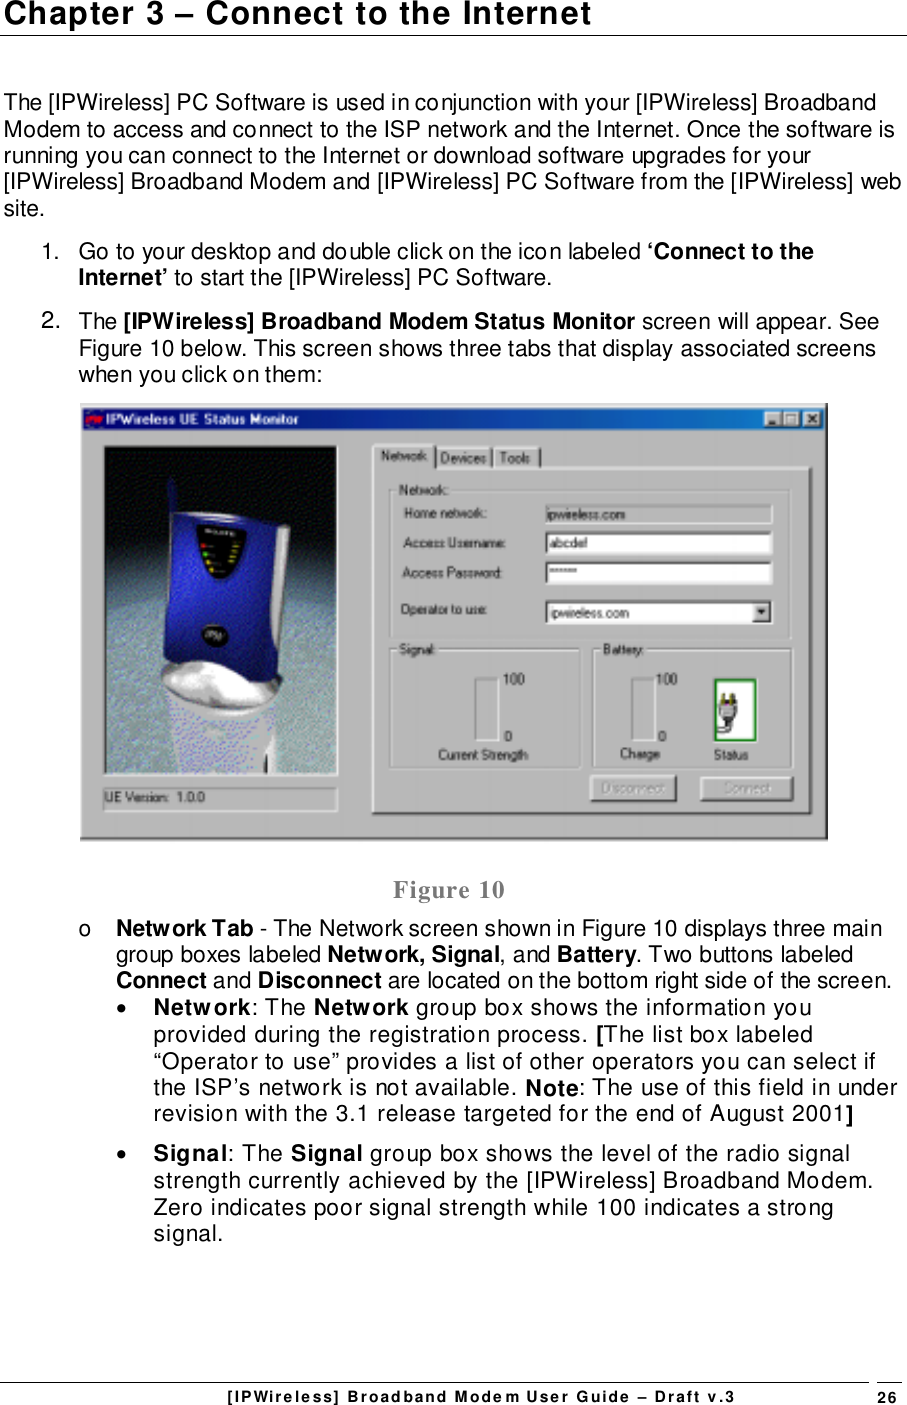 [IPWireless] Broadband Modem User Guide – Draft v.3 26Chapter 3 – Connect to the InternetThe [IPWireless] PC Software is used in conjunction with your [IPWireless] BroadbandModem to access and connect to the ISP network and the Internet. Once the software isrunning you can connect to the Internet or download software upgrades for your[IPWireless] Broadband Modem and [IPWireless] PC Software from the [IPWireless] website.1.  Go to your desktop and double click on the icon labeled ‘Connect to theInternet’ to start the [IPWireless] PC Software.2.  The [IPWireless] Broadband Modem Status Monitor screen will appear. SeeFigure 10 below. This screen shows three tabs that display associated screenswhen you click on them:Figure 10o  Network Tab - The Network screen shown in Figure 10 displays three maingroup boxes labeled Network, Signal, and Battery. Two buttons labeledConnect and Disconnect are located on the bottom right side of the screen.• Network: The Network group box shows the information youprovided during the registration process. [The list box labeled“Operator to use” provides a list of other operators you can select ifthe ISP’s network is not available. Note: The use of this field in underrevision with the 3.1 release targeted for the end of August 2001]• Signal: The Signal group box shows the level of the radio signalstrength currently achieved by the [IPWireless] Broadband Modem.Zero indicates poor signal strength while 100 indicates a strongsignal.